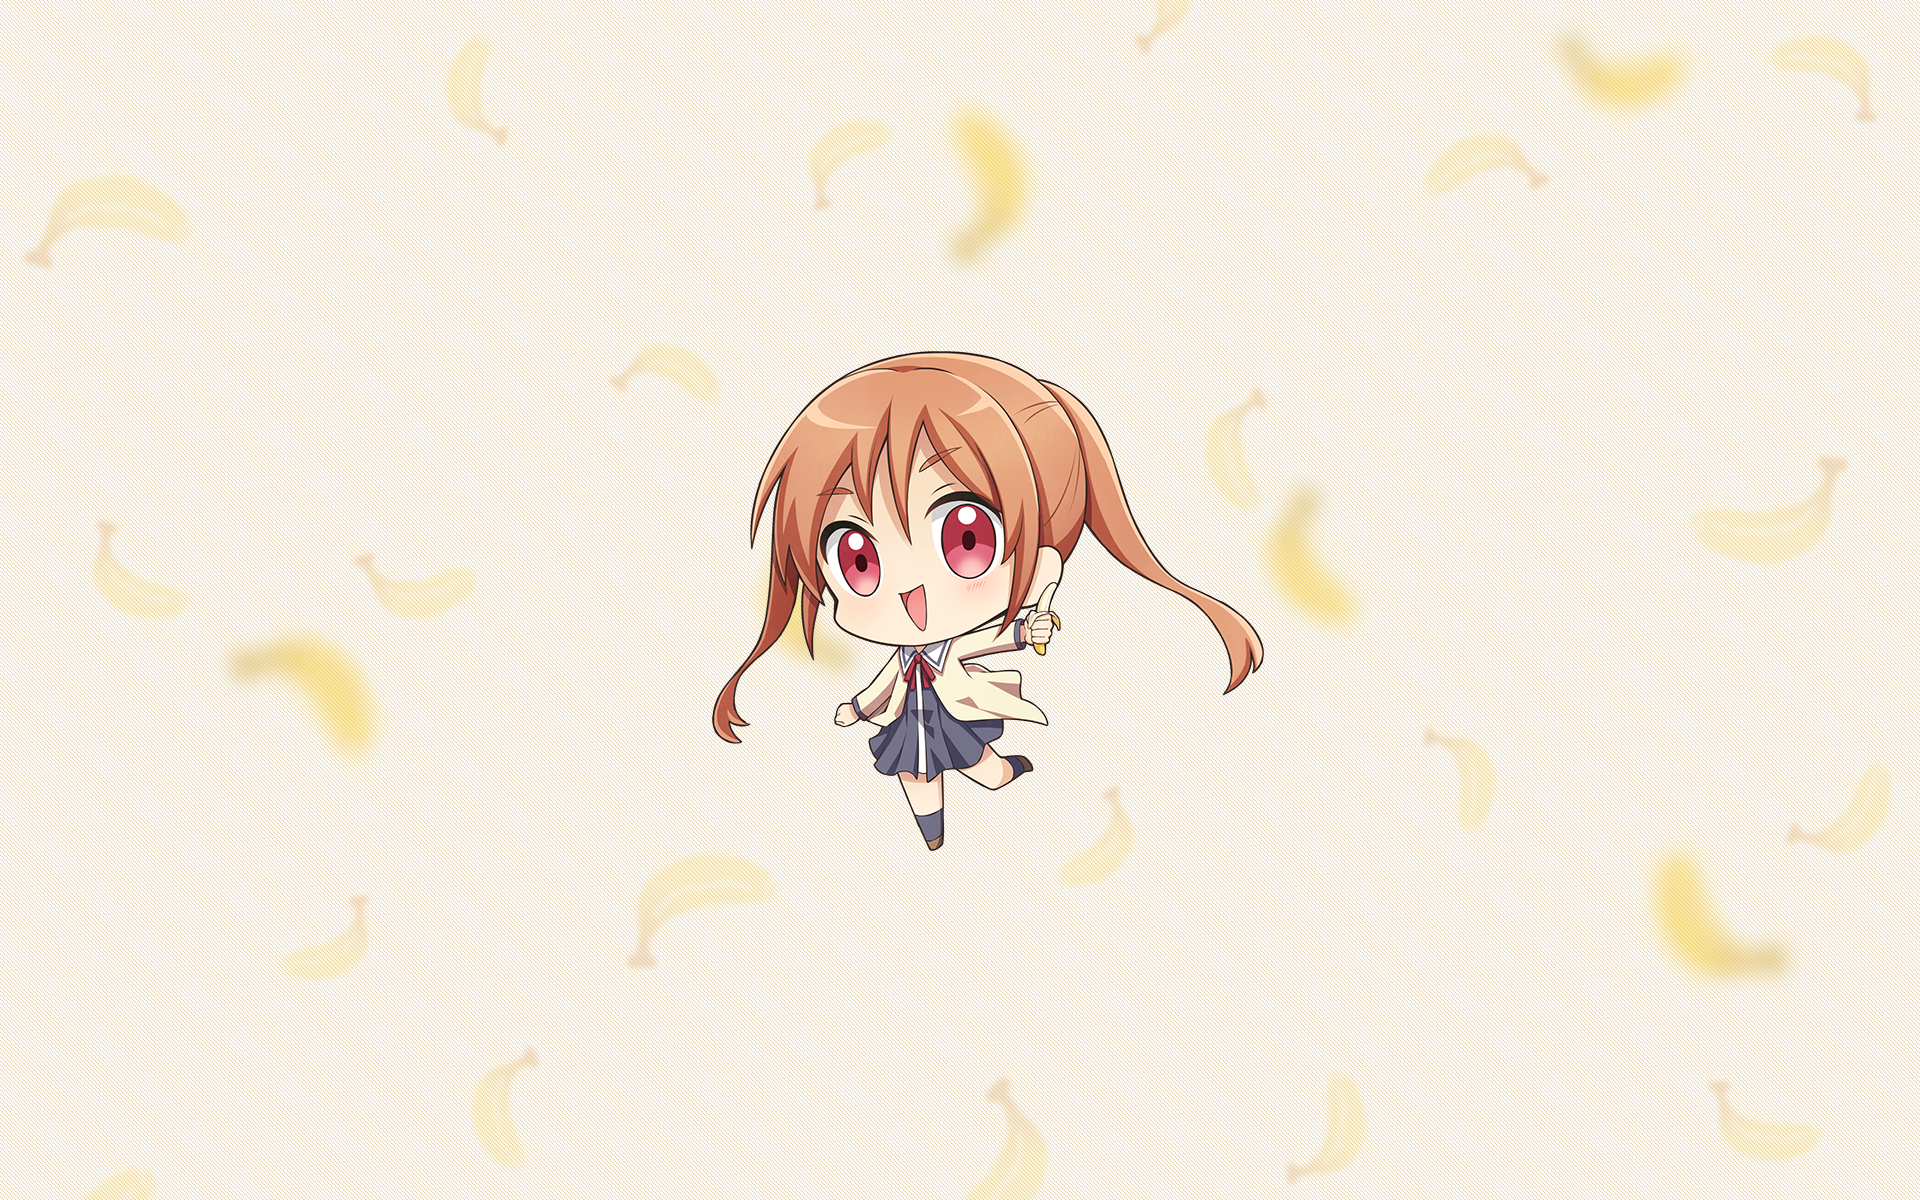 Aho Girl HD Wallpaper Background Image